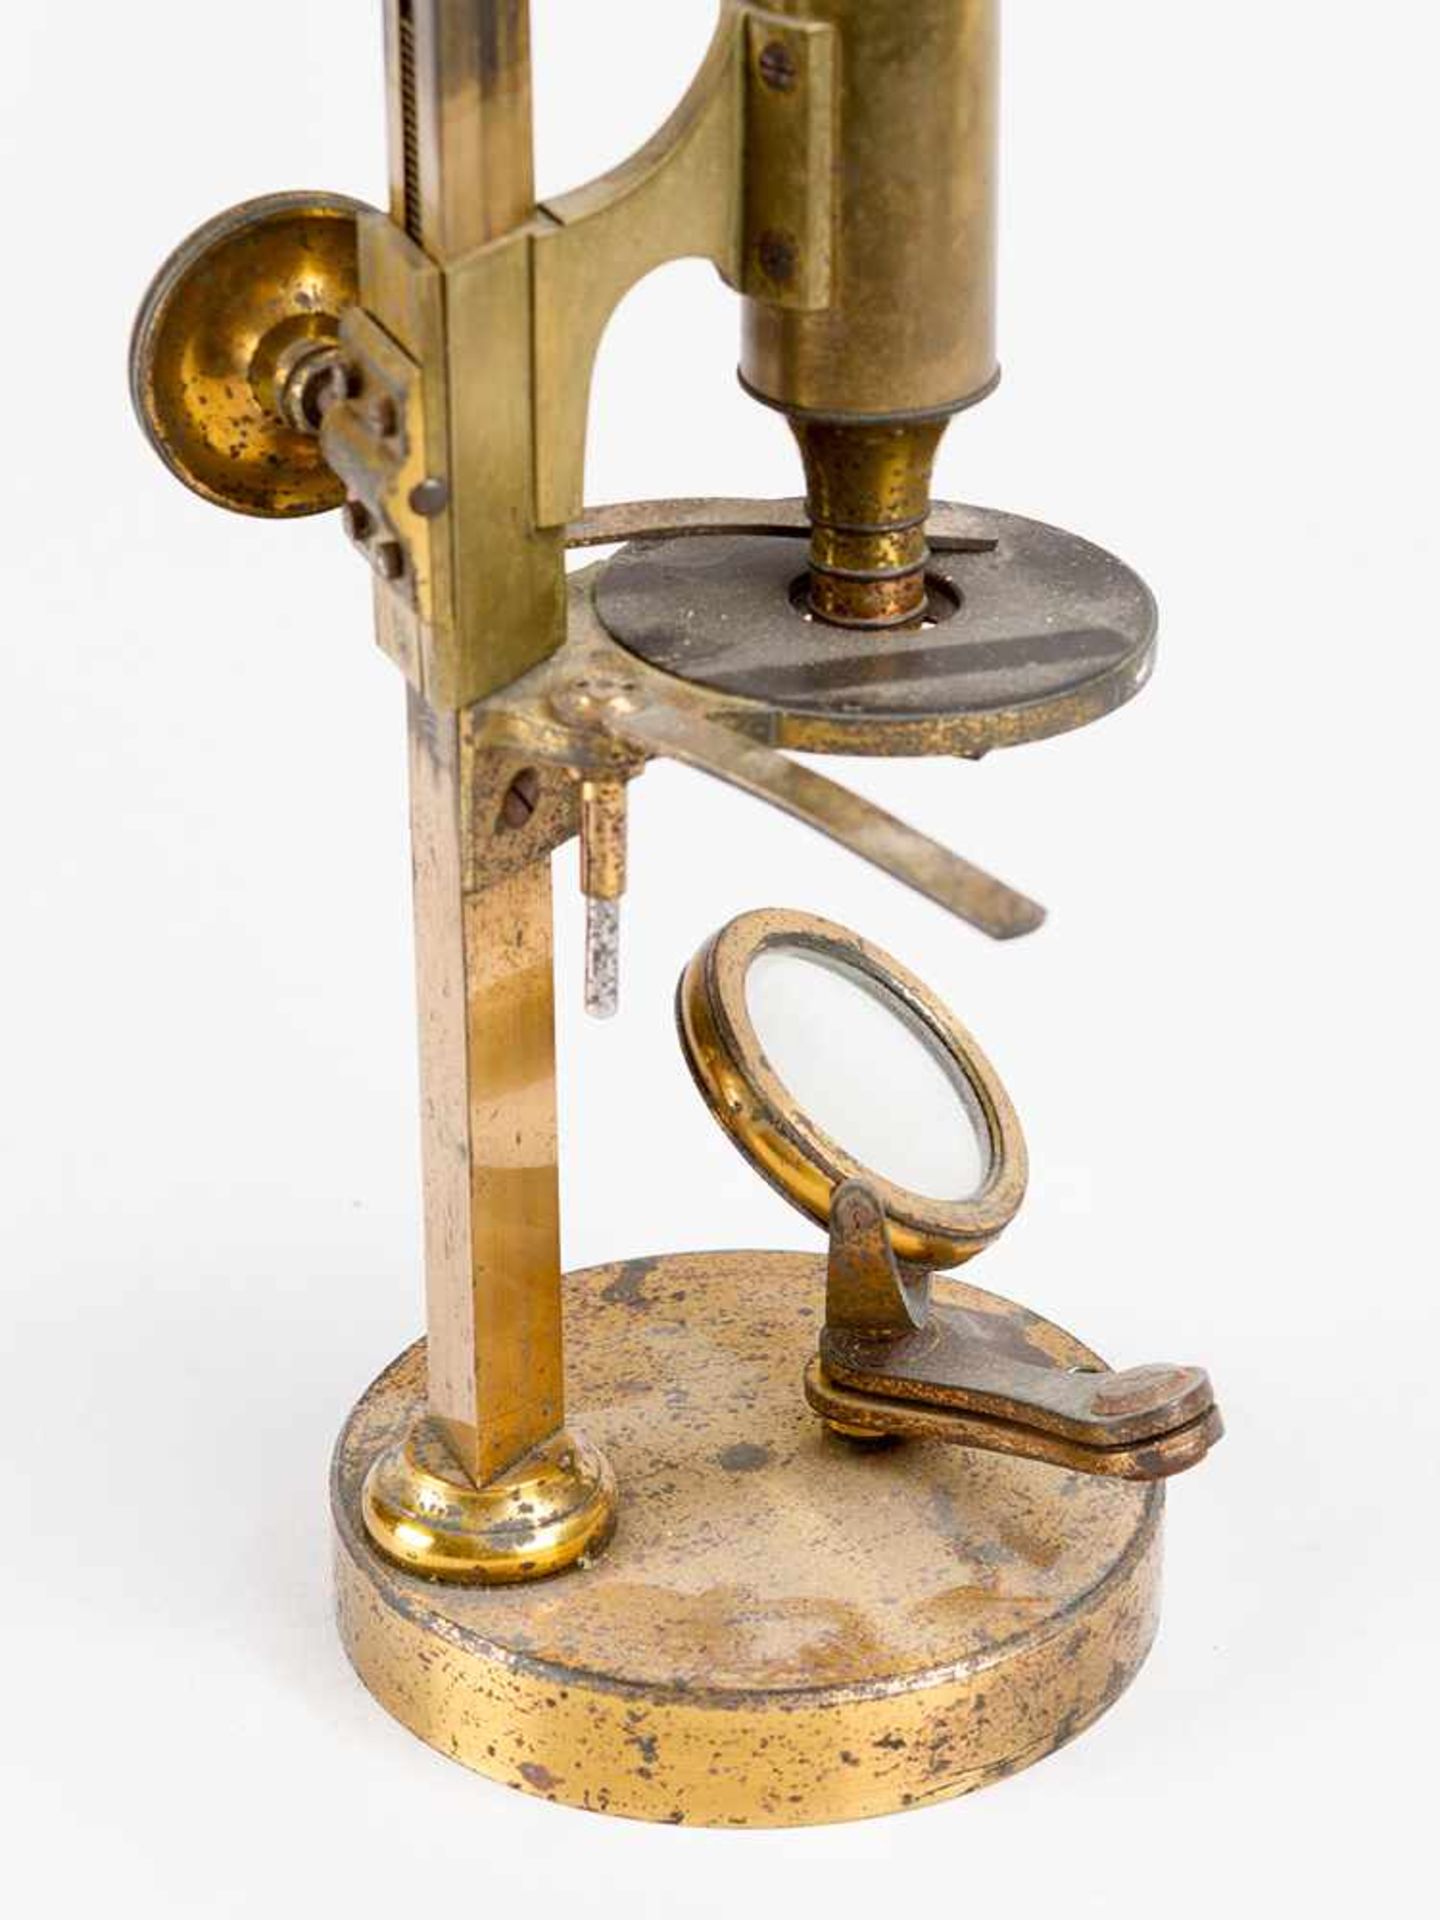 Vienna Microscope, probably by the Plössl Manufacture, gilded and polished brass, adjustable, - Bild 3 aus 3